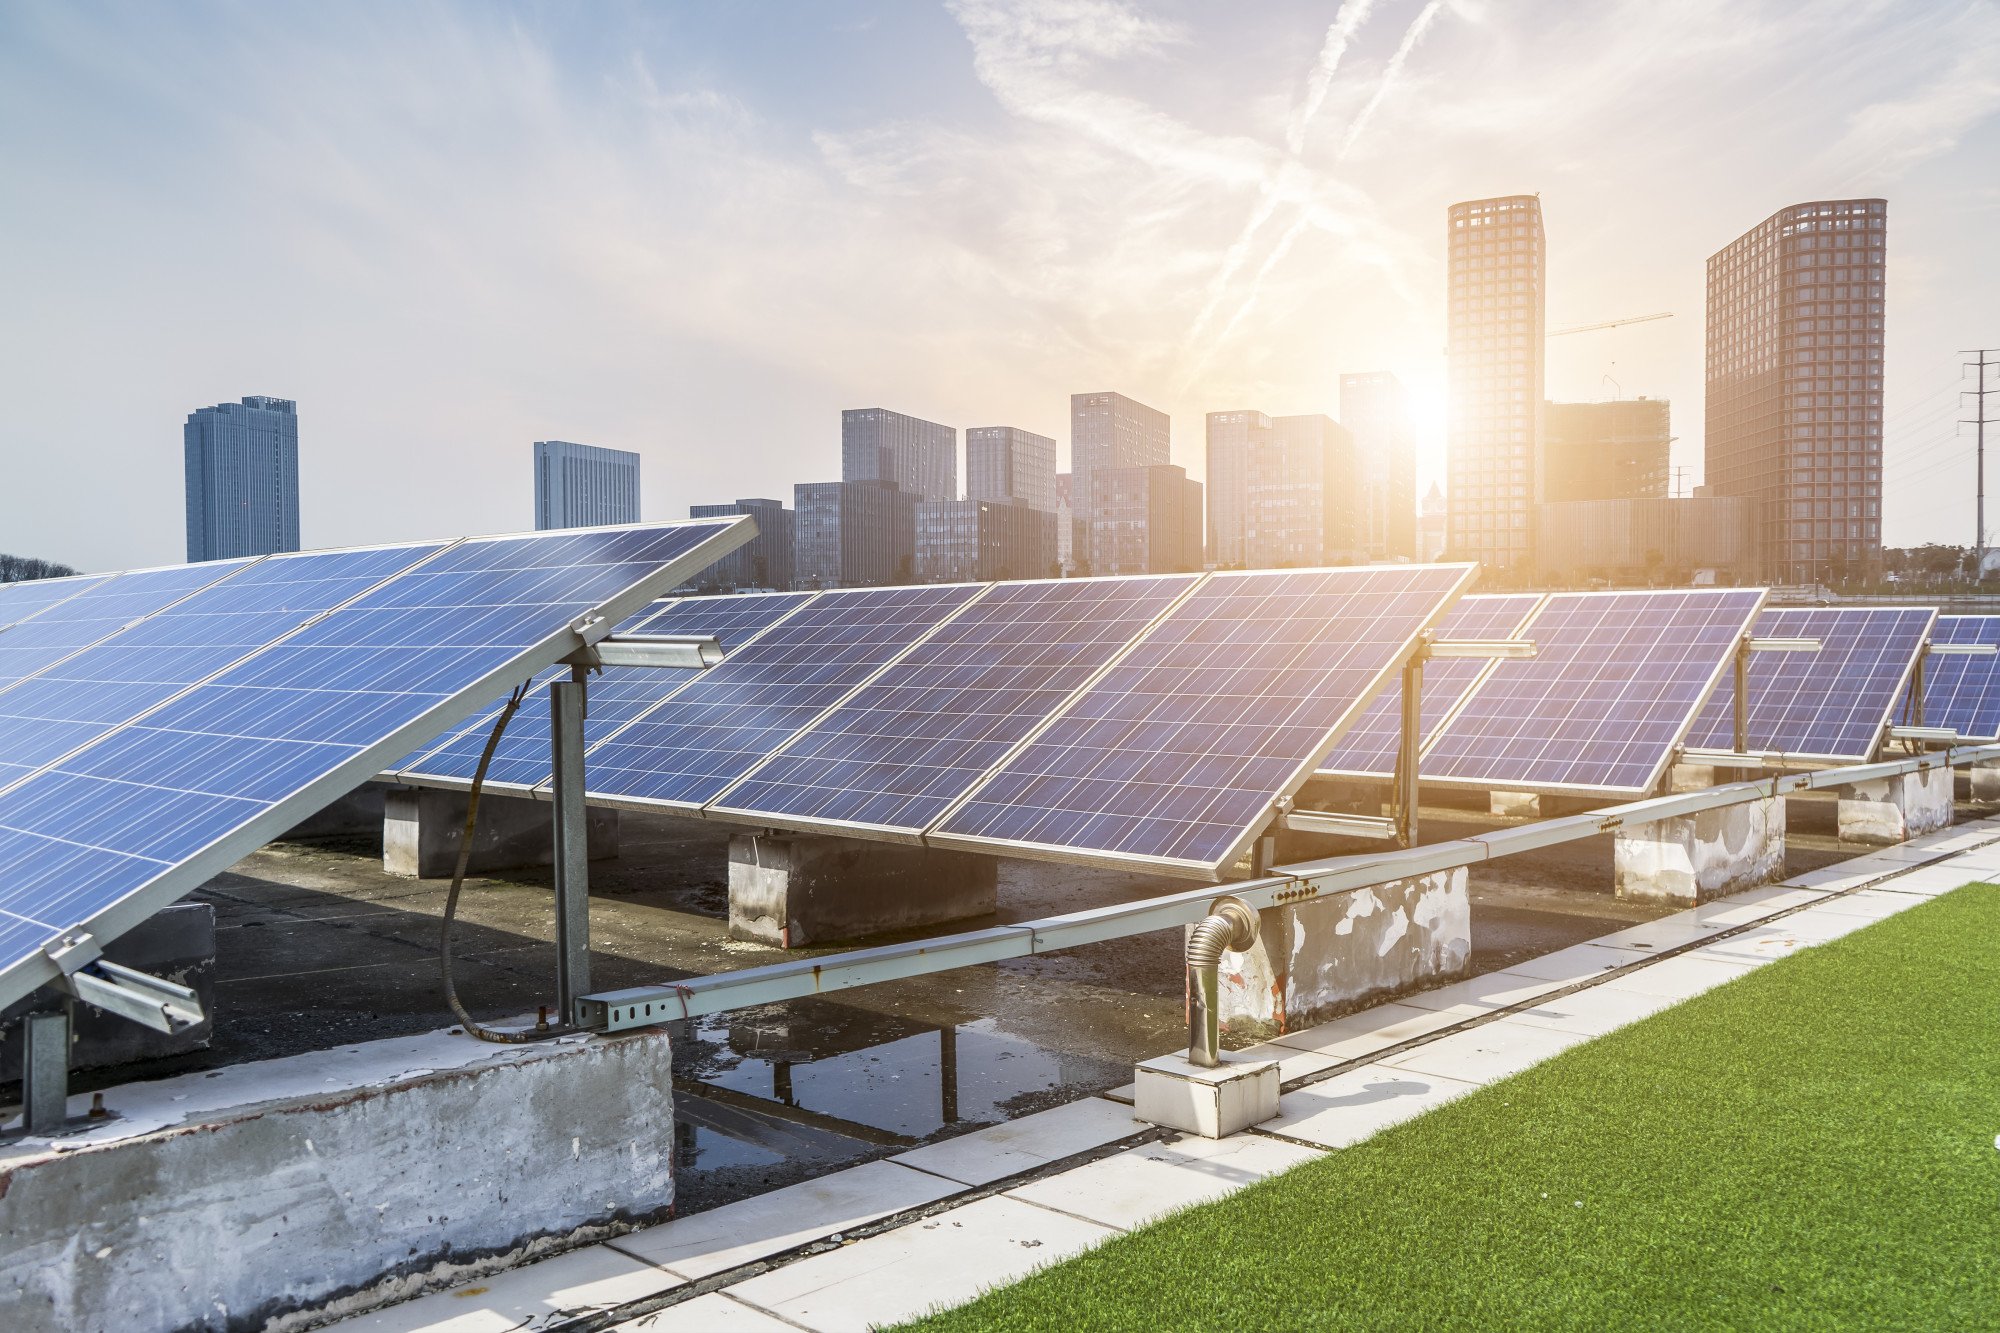 There are several reasons to consider solar panels for commercial buildings. Learn more about these advantages by checking out this guide.